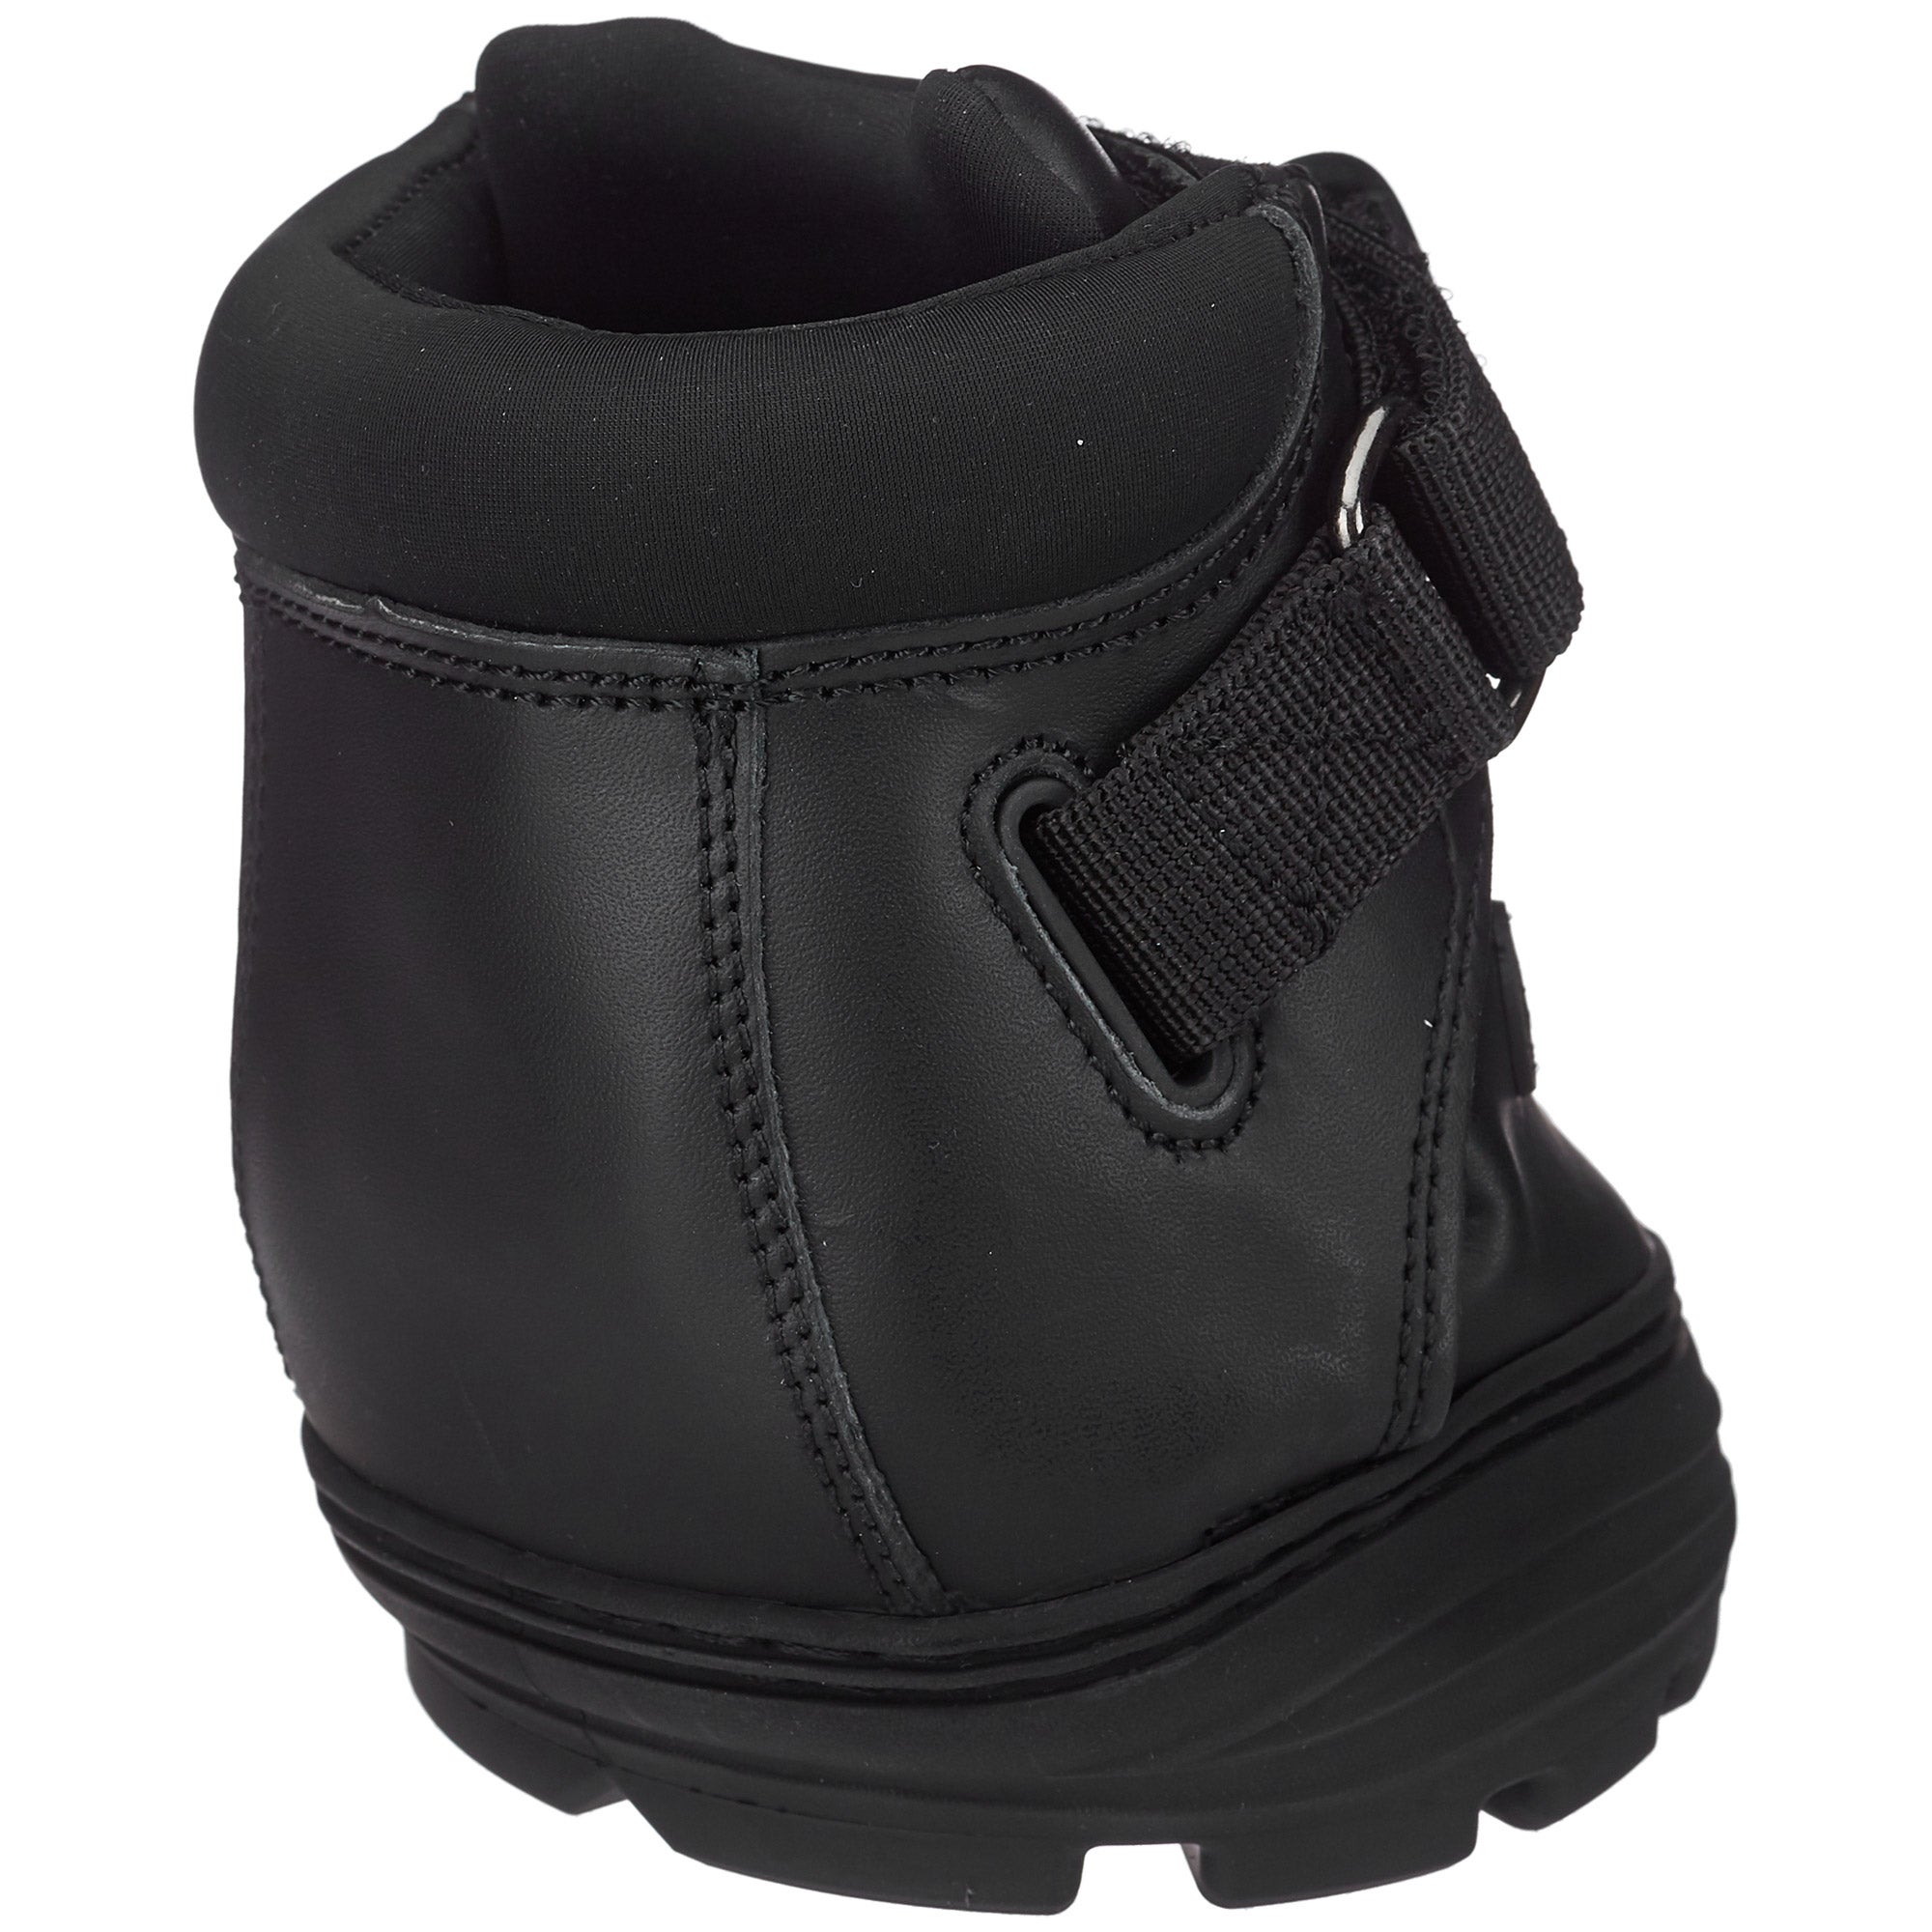 easycare easyboot new trail boot